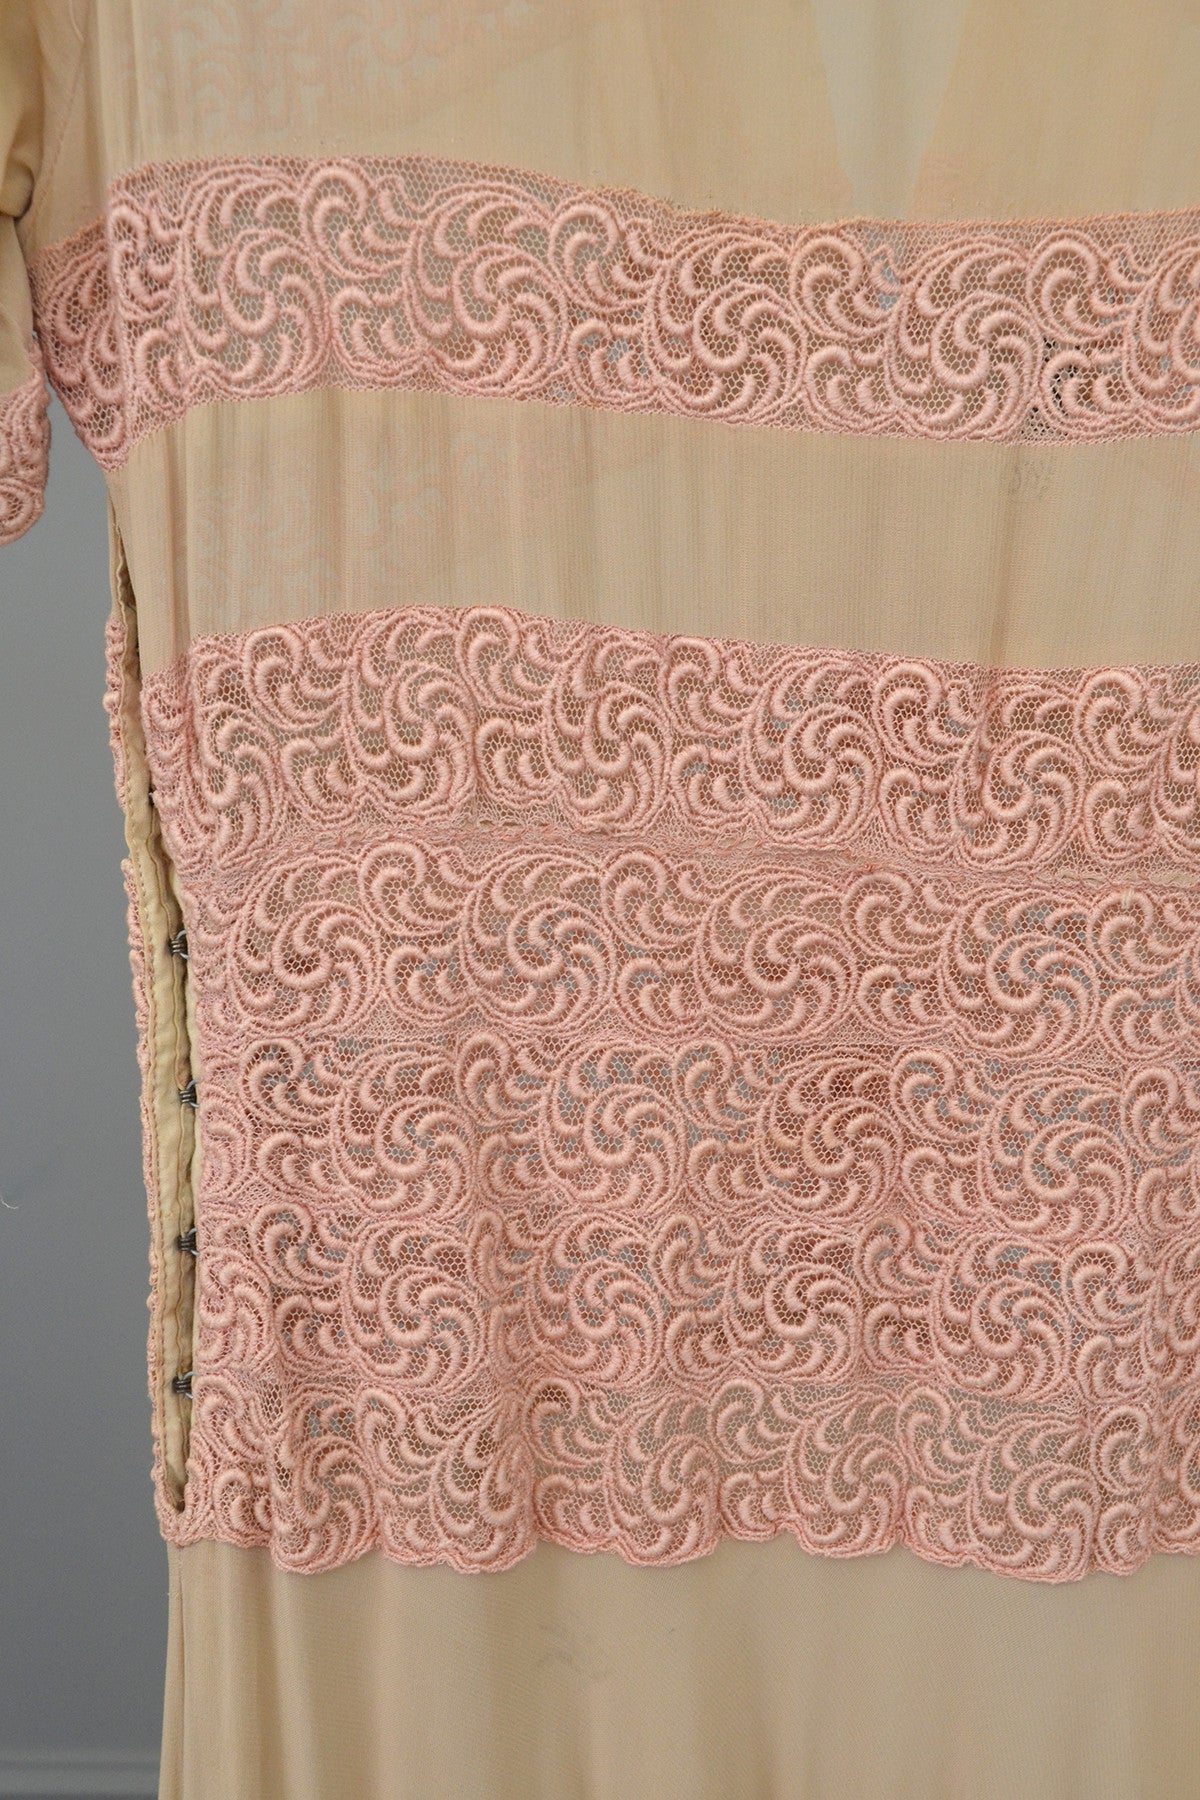 1930s Glamour Gown | Pink Embroidered Lace Ecru Rayon Crepe Deco Gown